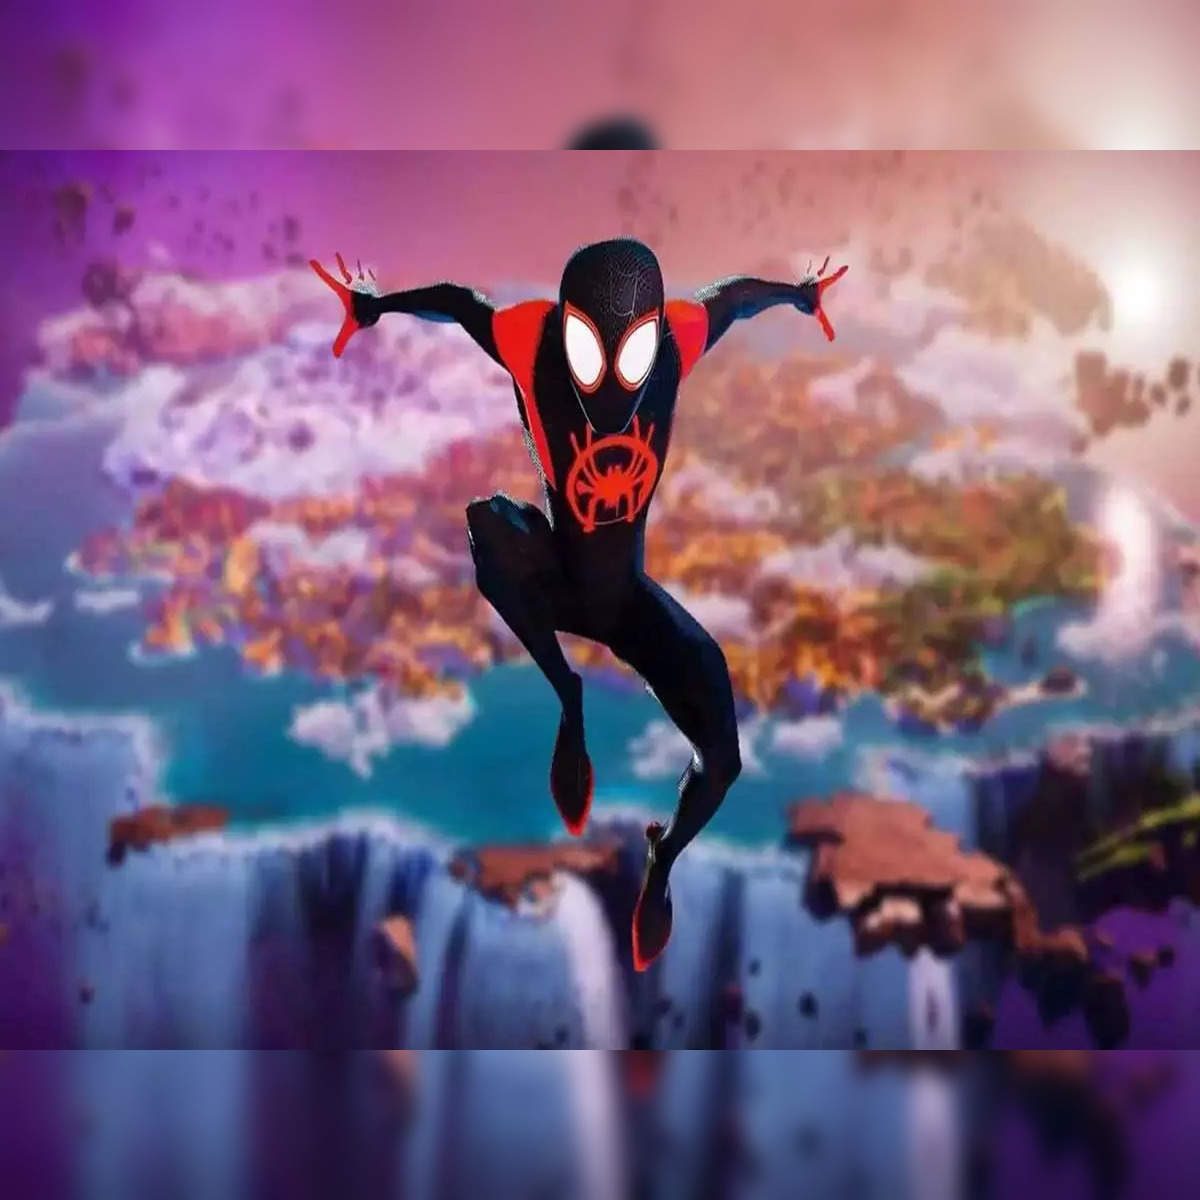 Who are the Voices in Spider-Man: Across the Spider-Verse